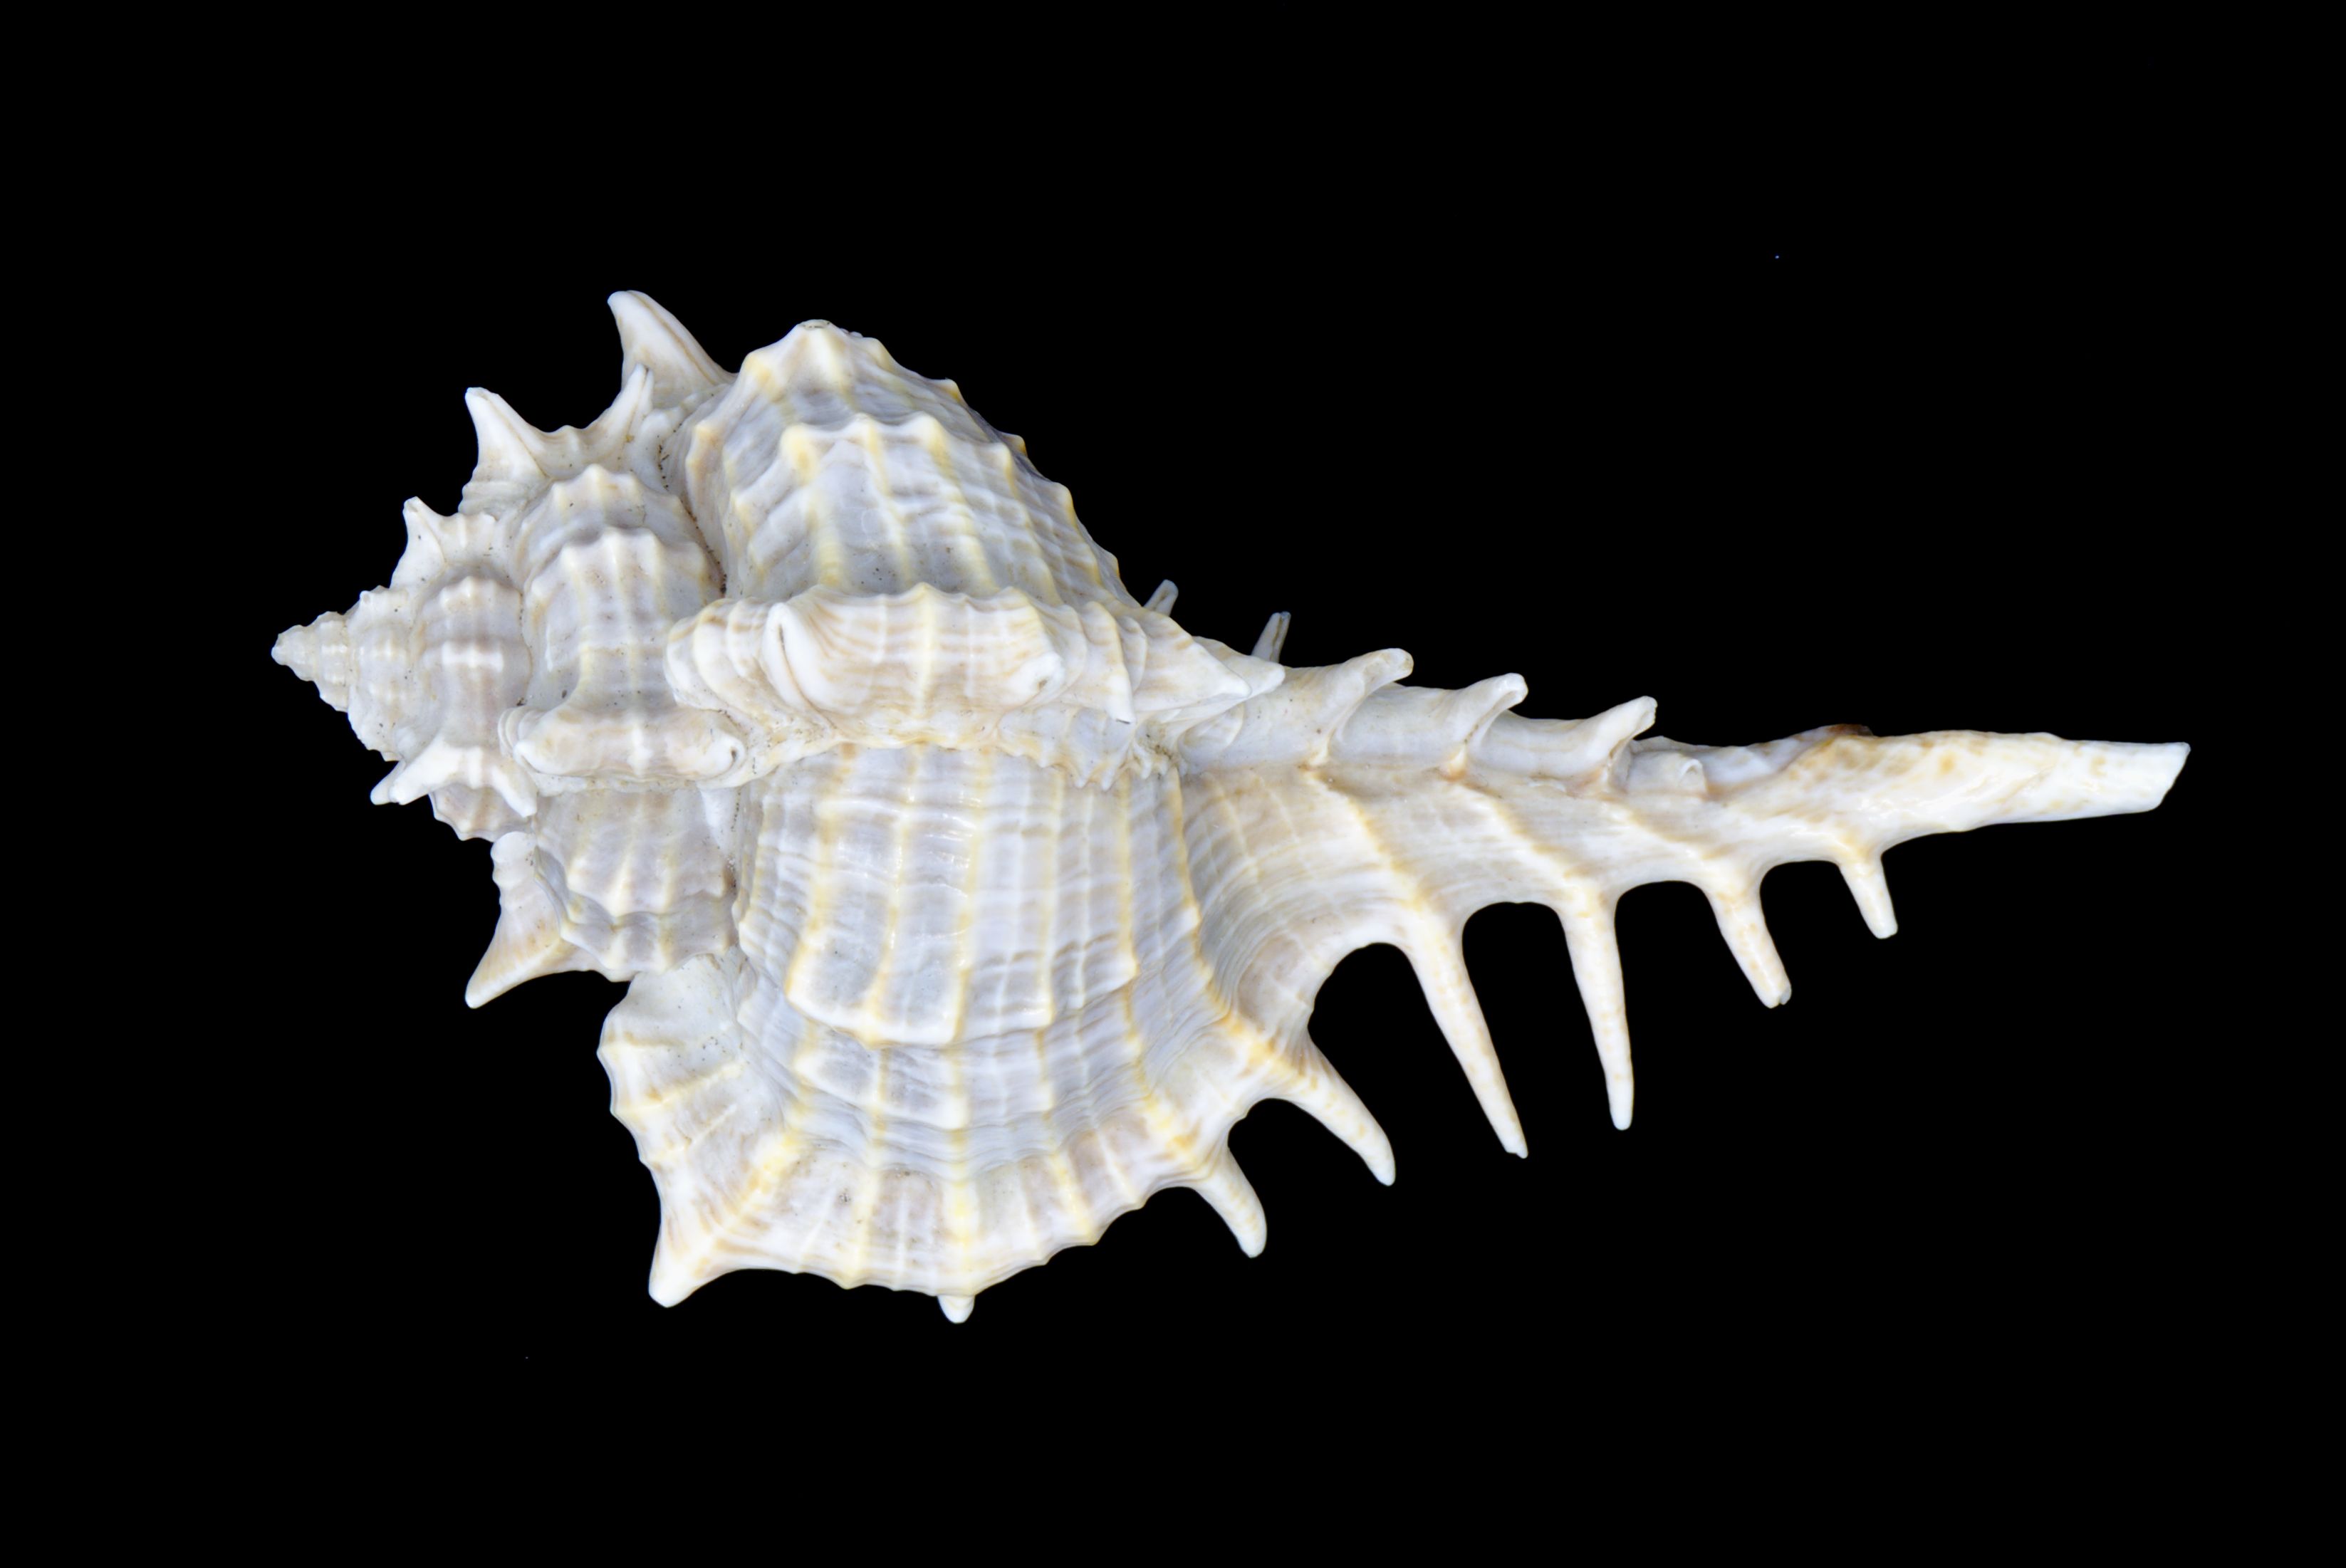 Vokesimurex elenensis, a white, spiny sea snail with a long spindle and cream-colored stripes